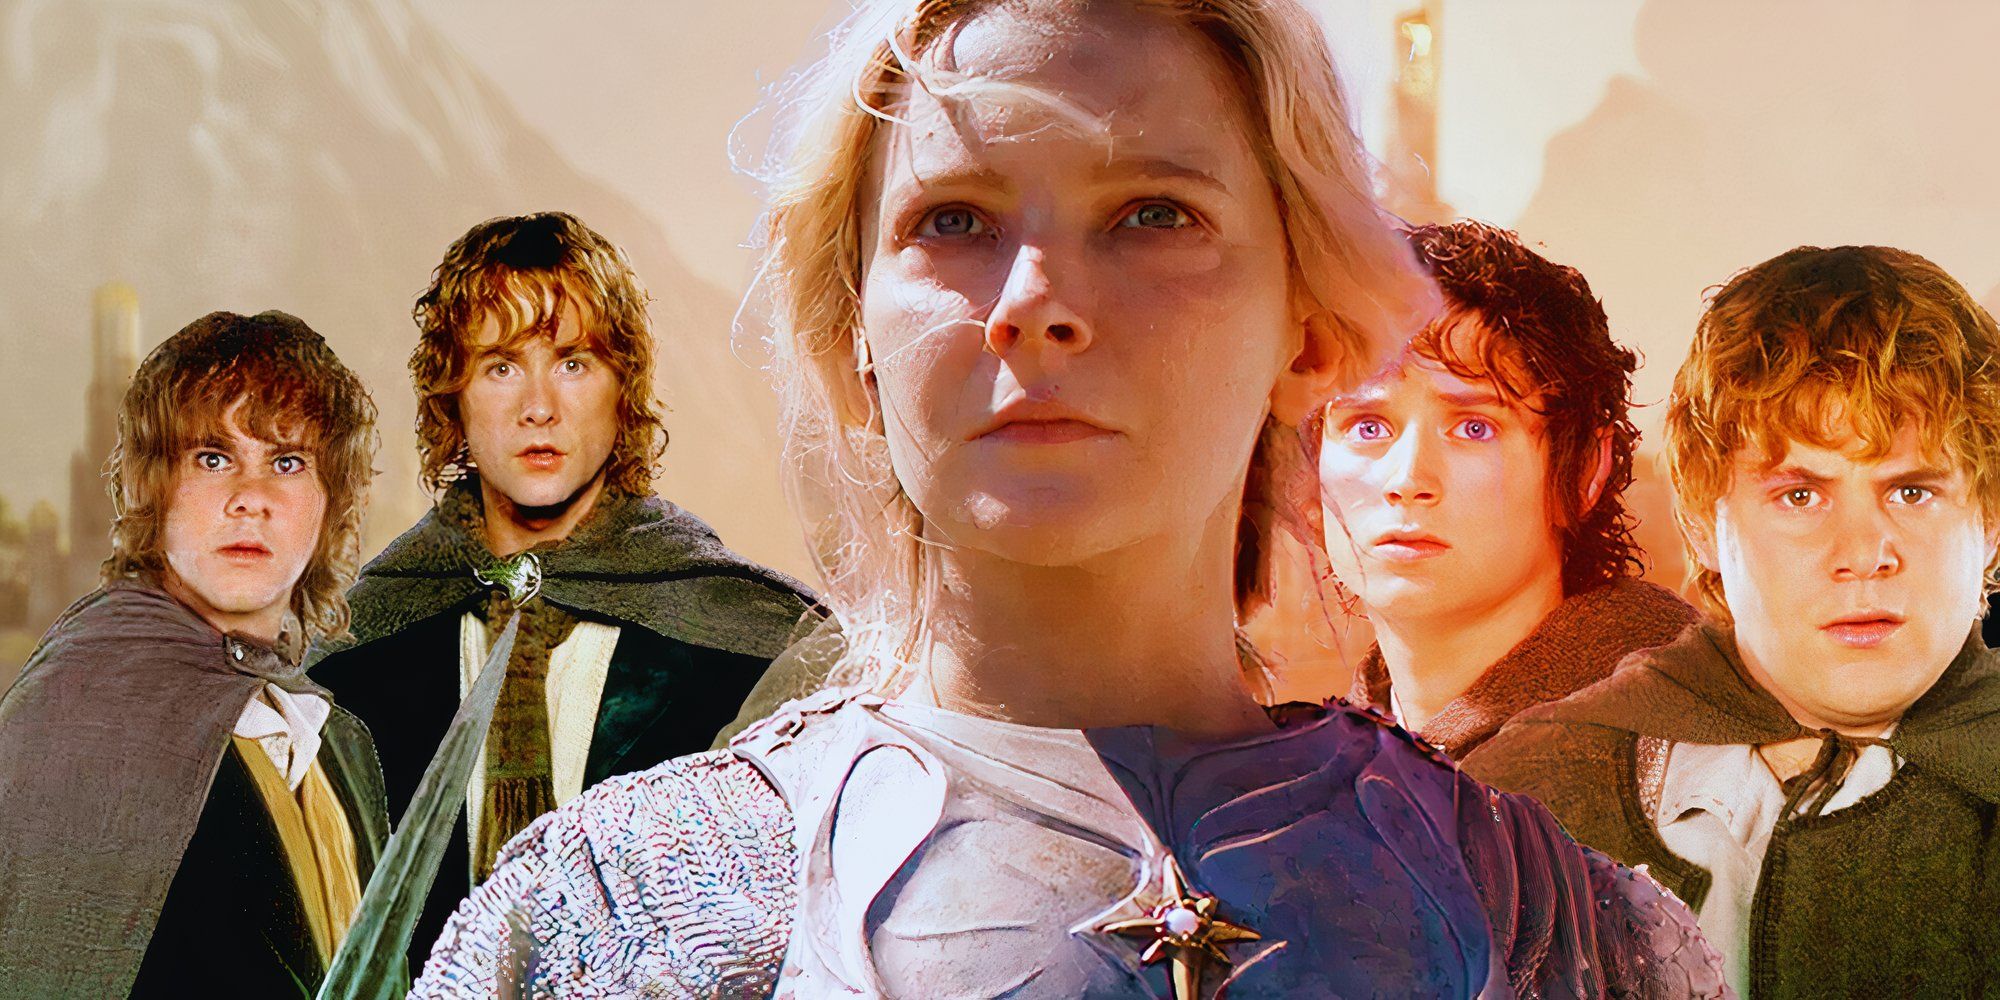 The Lord of the Rings: The Rings Of Power Galadriel played by Morfydd Clark with hobbits Frodo and Pippin in the background.